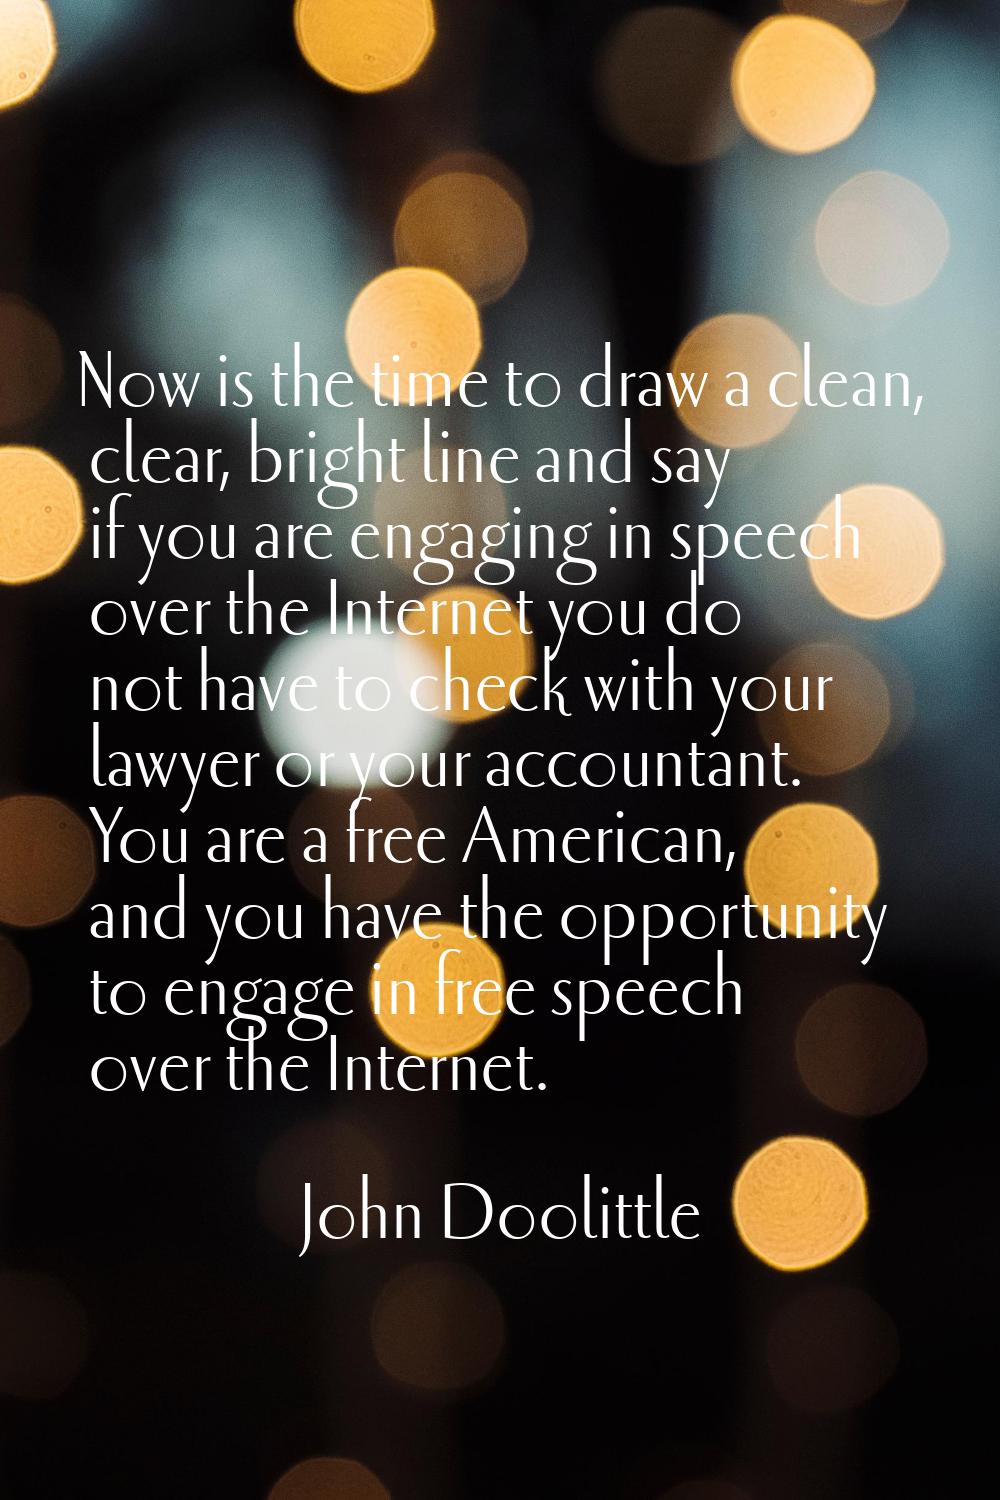 Now is the time to draw a clean, clear, bright line and say if you are engaging in speech over the 